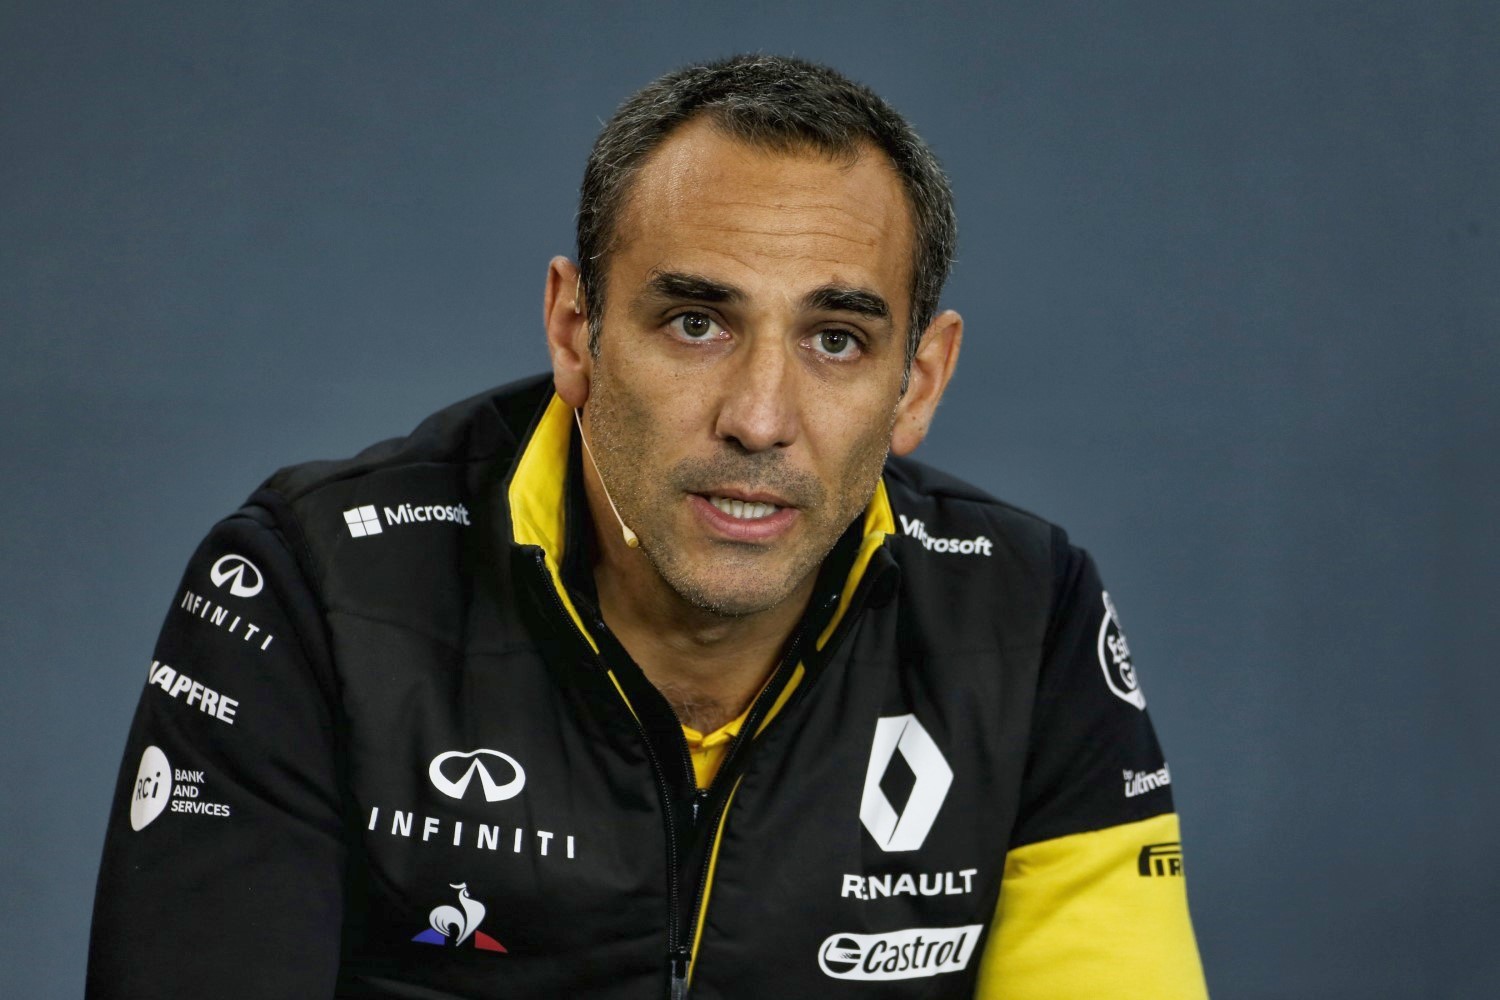 But Abiteboul made the bold claim that Renault will surpass Mercedes and Ferrari in power